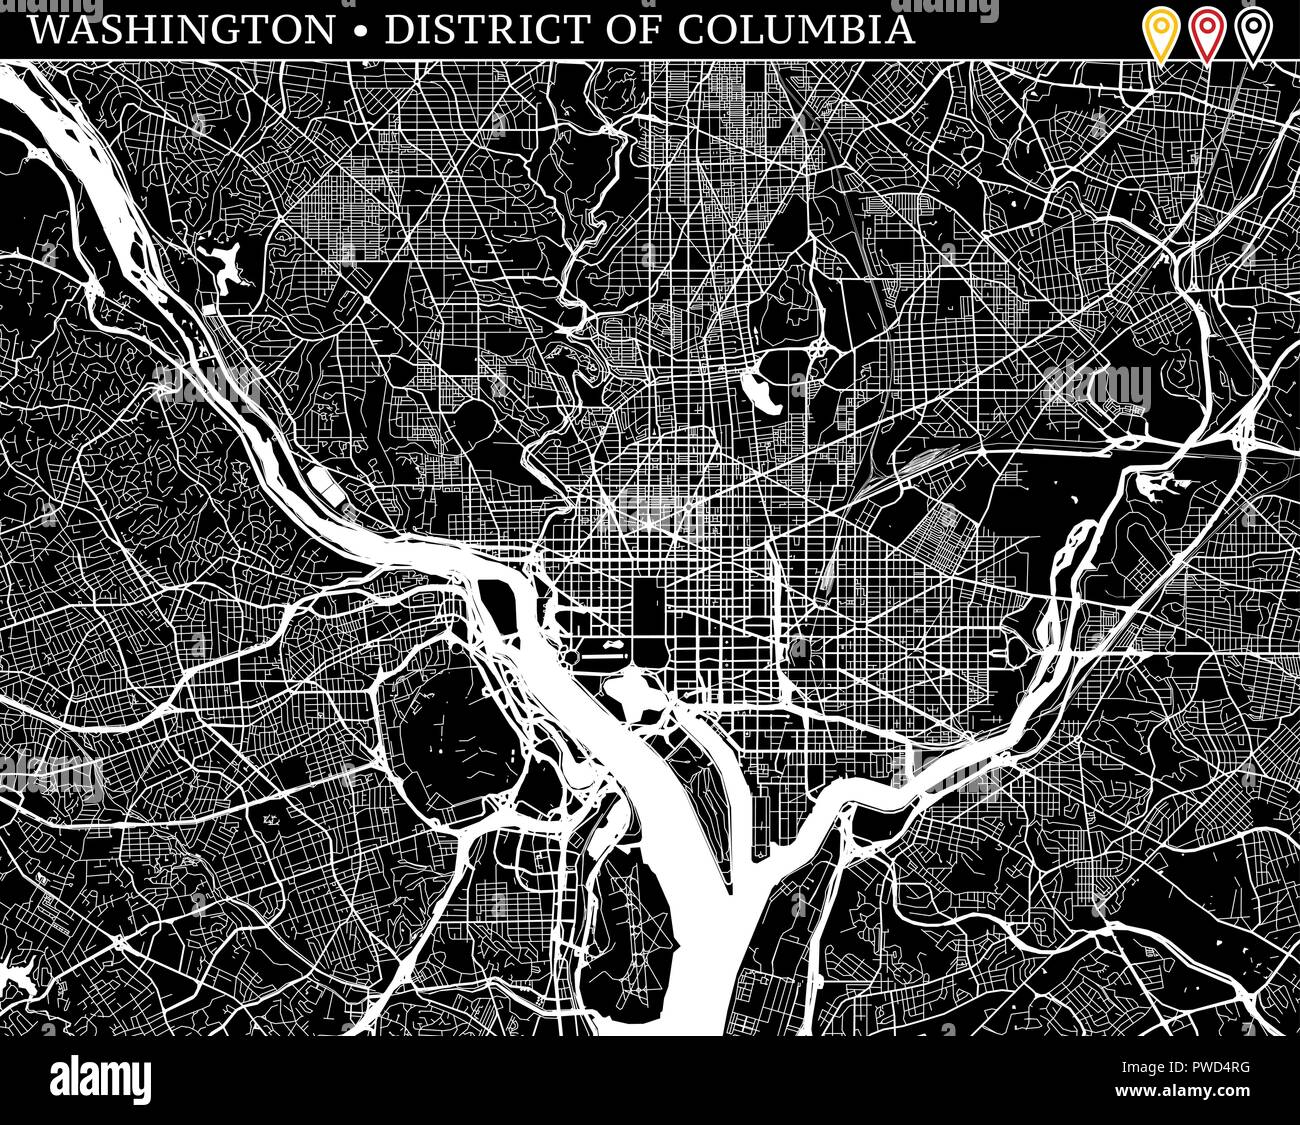 Simple map of Washington, District of Columbia, USA. Black and white version for clean backgrounds and prints. This map of Washington contains three m Stock Vector